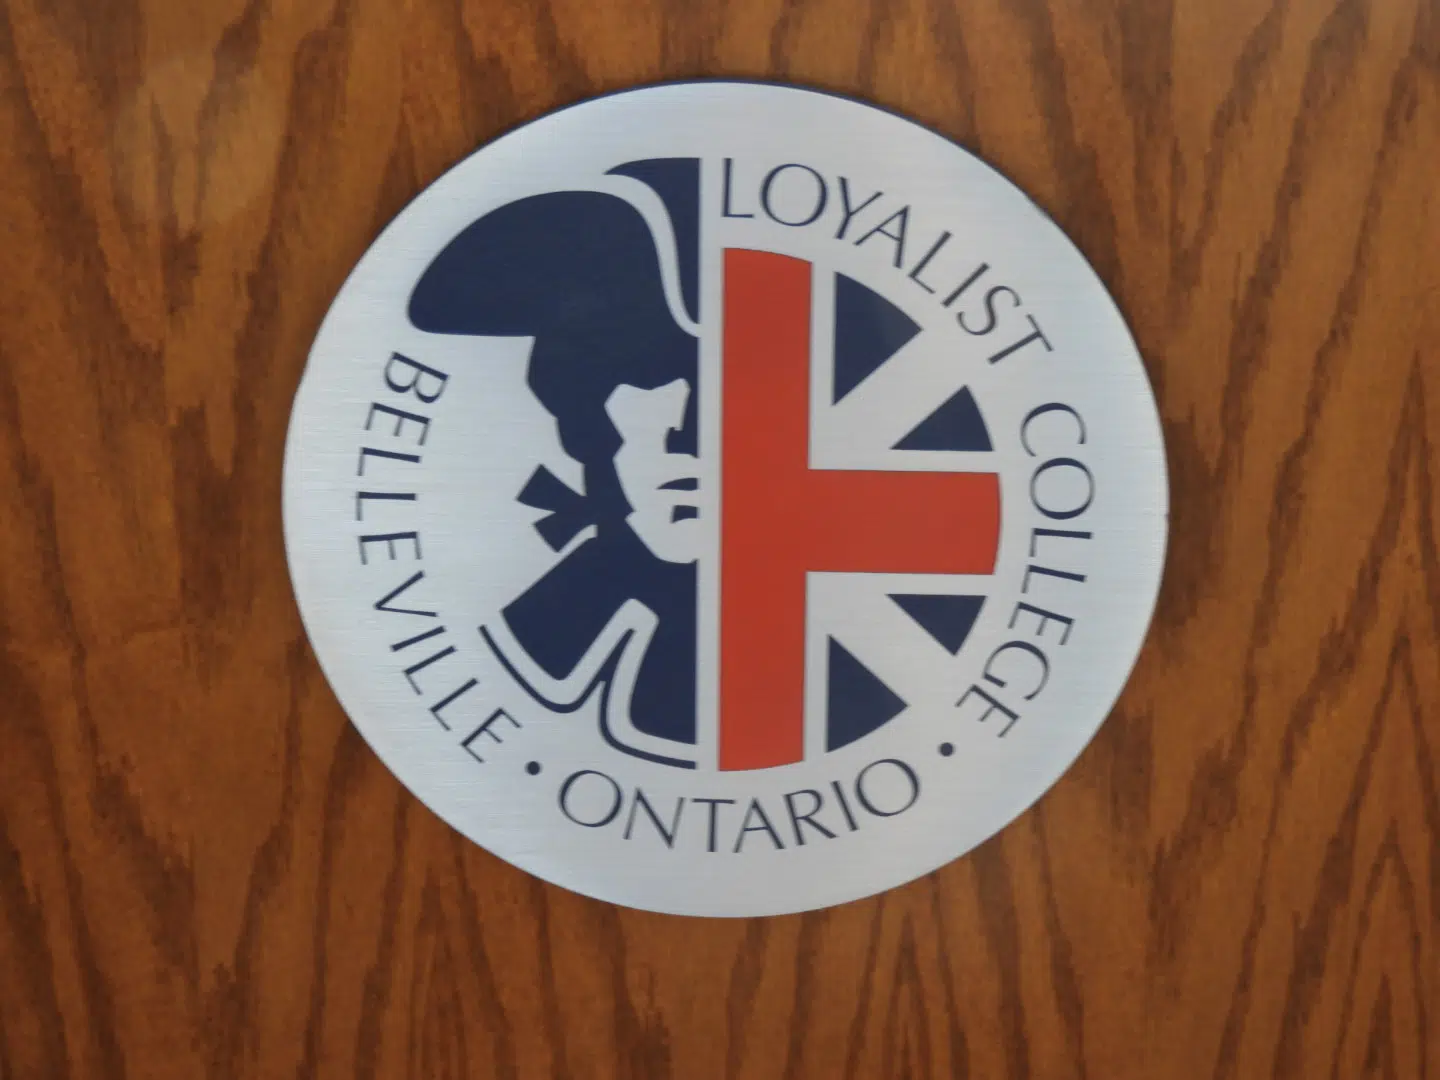 RELEASE: New course offered at Loyalist College